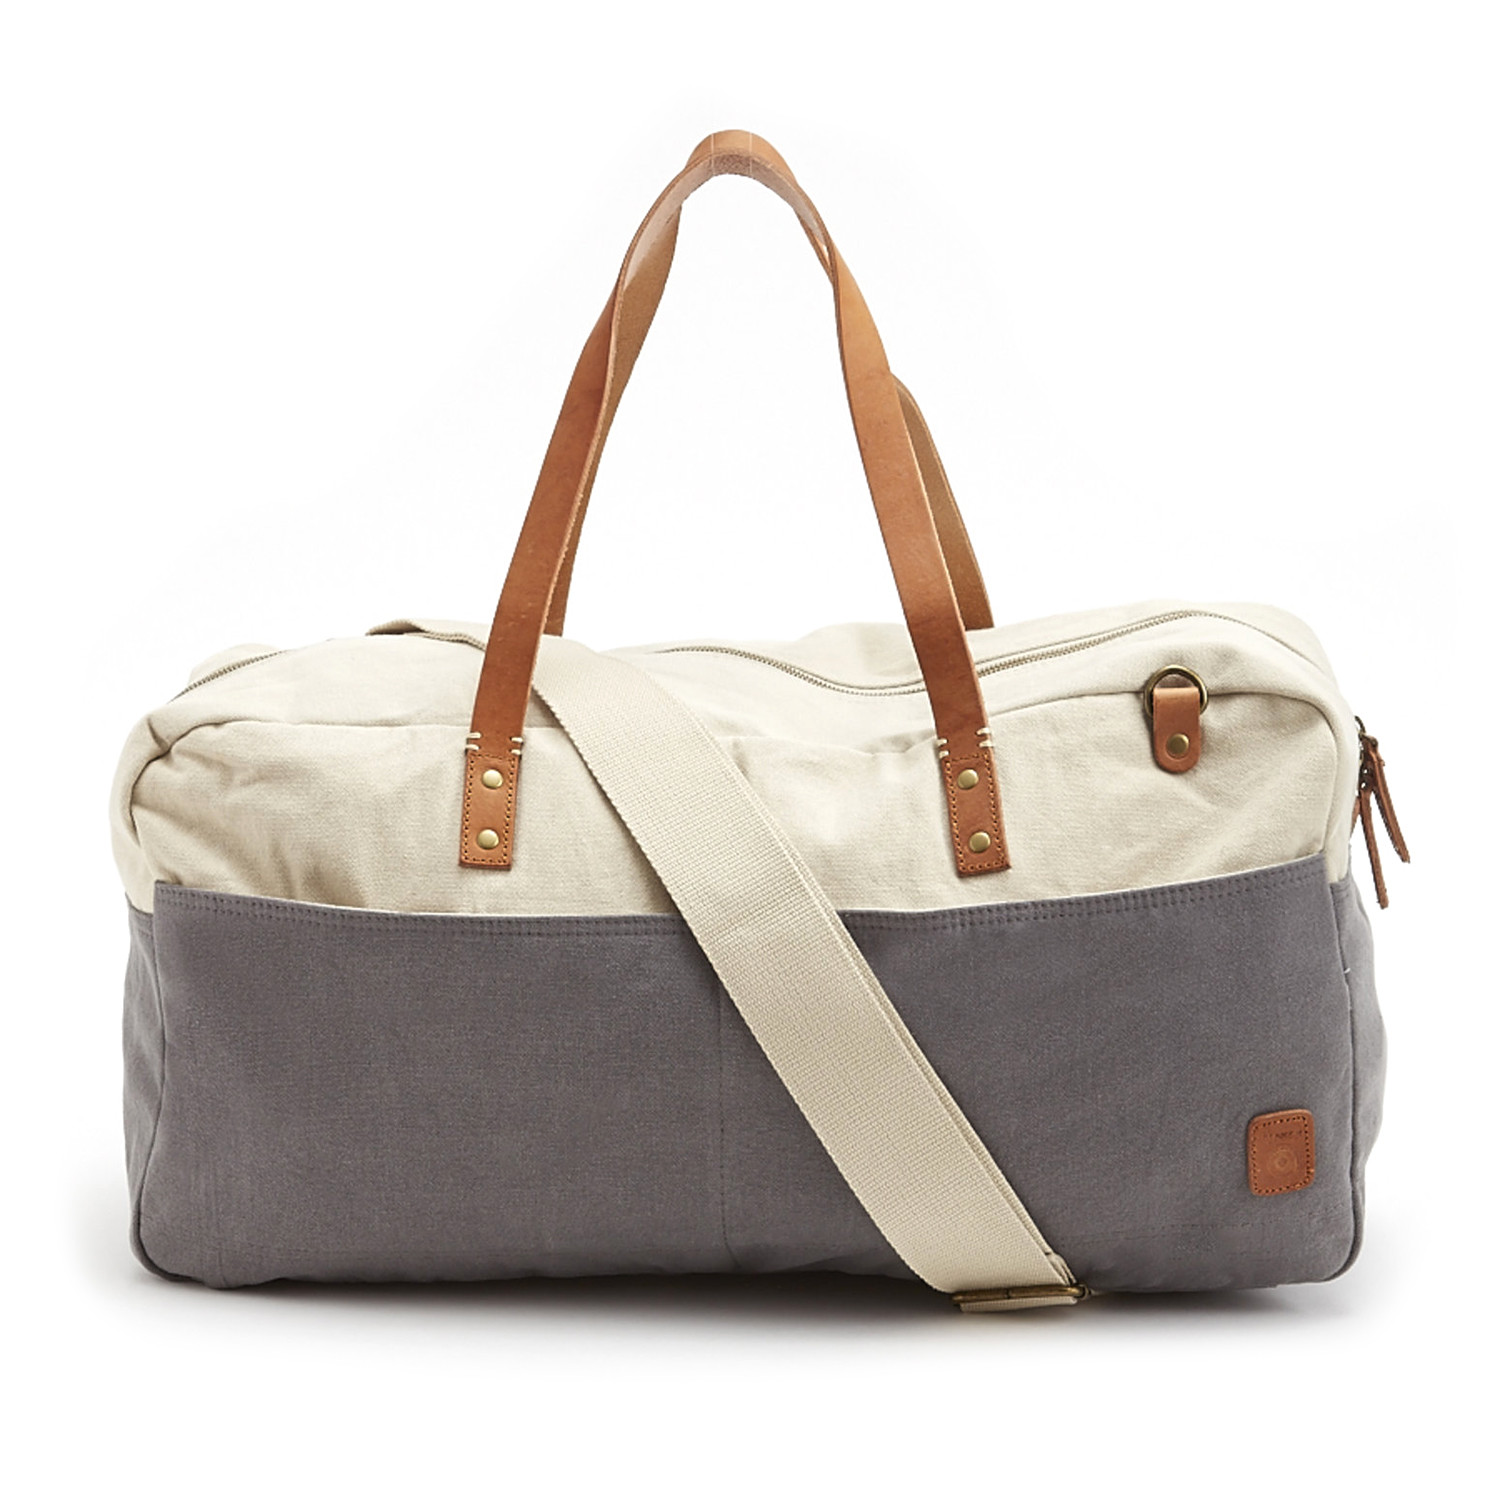 Two Tone Washed Canvas Shoulder Duffle Bag // Grey - Maker & Company ...